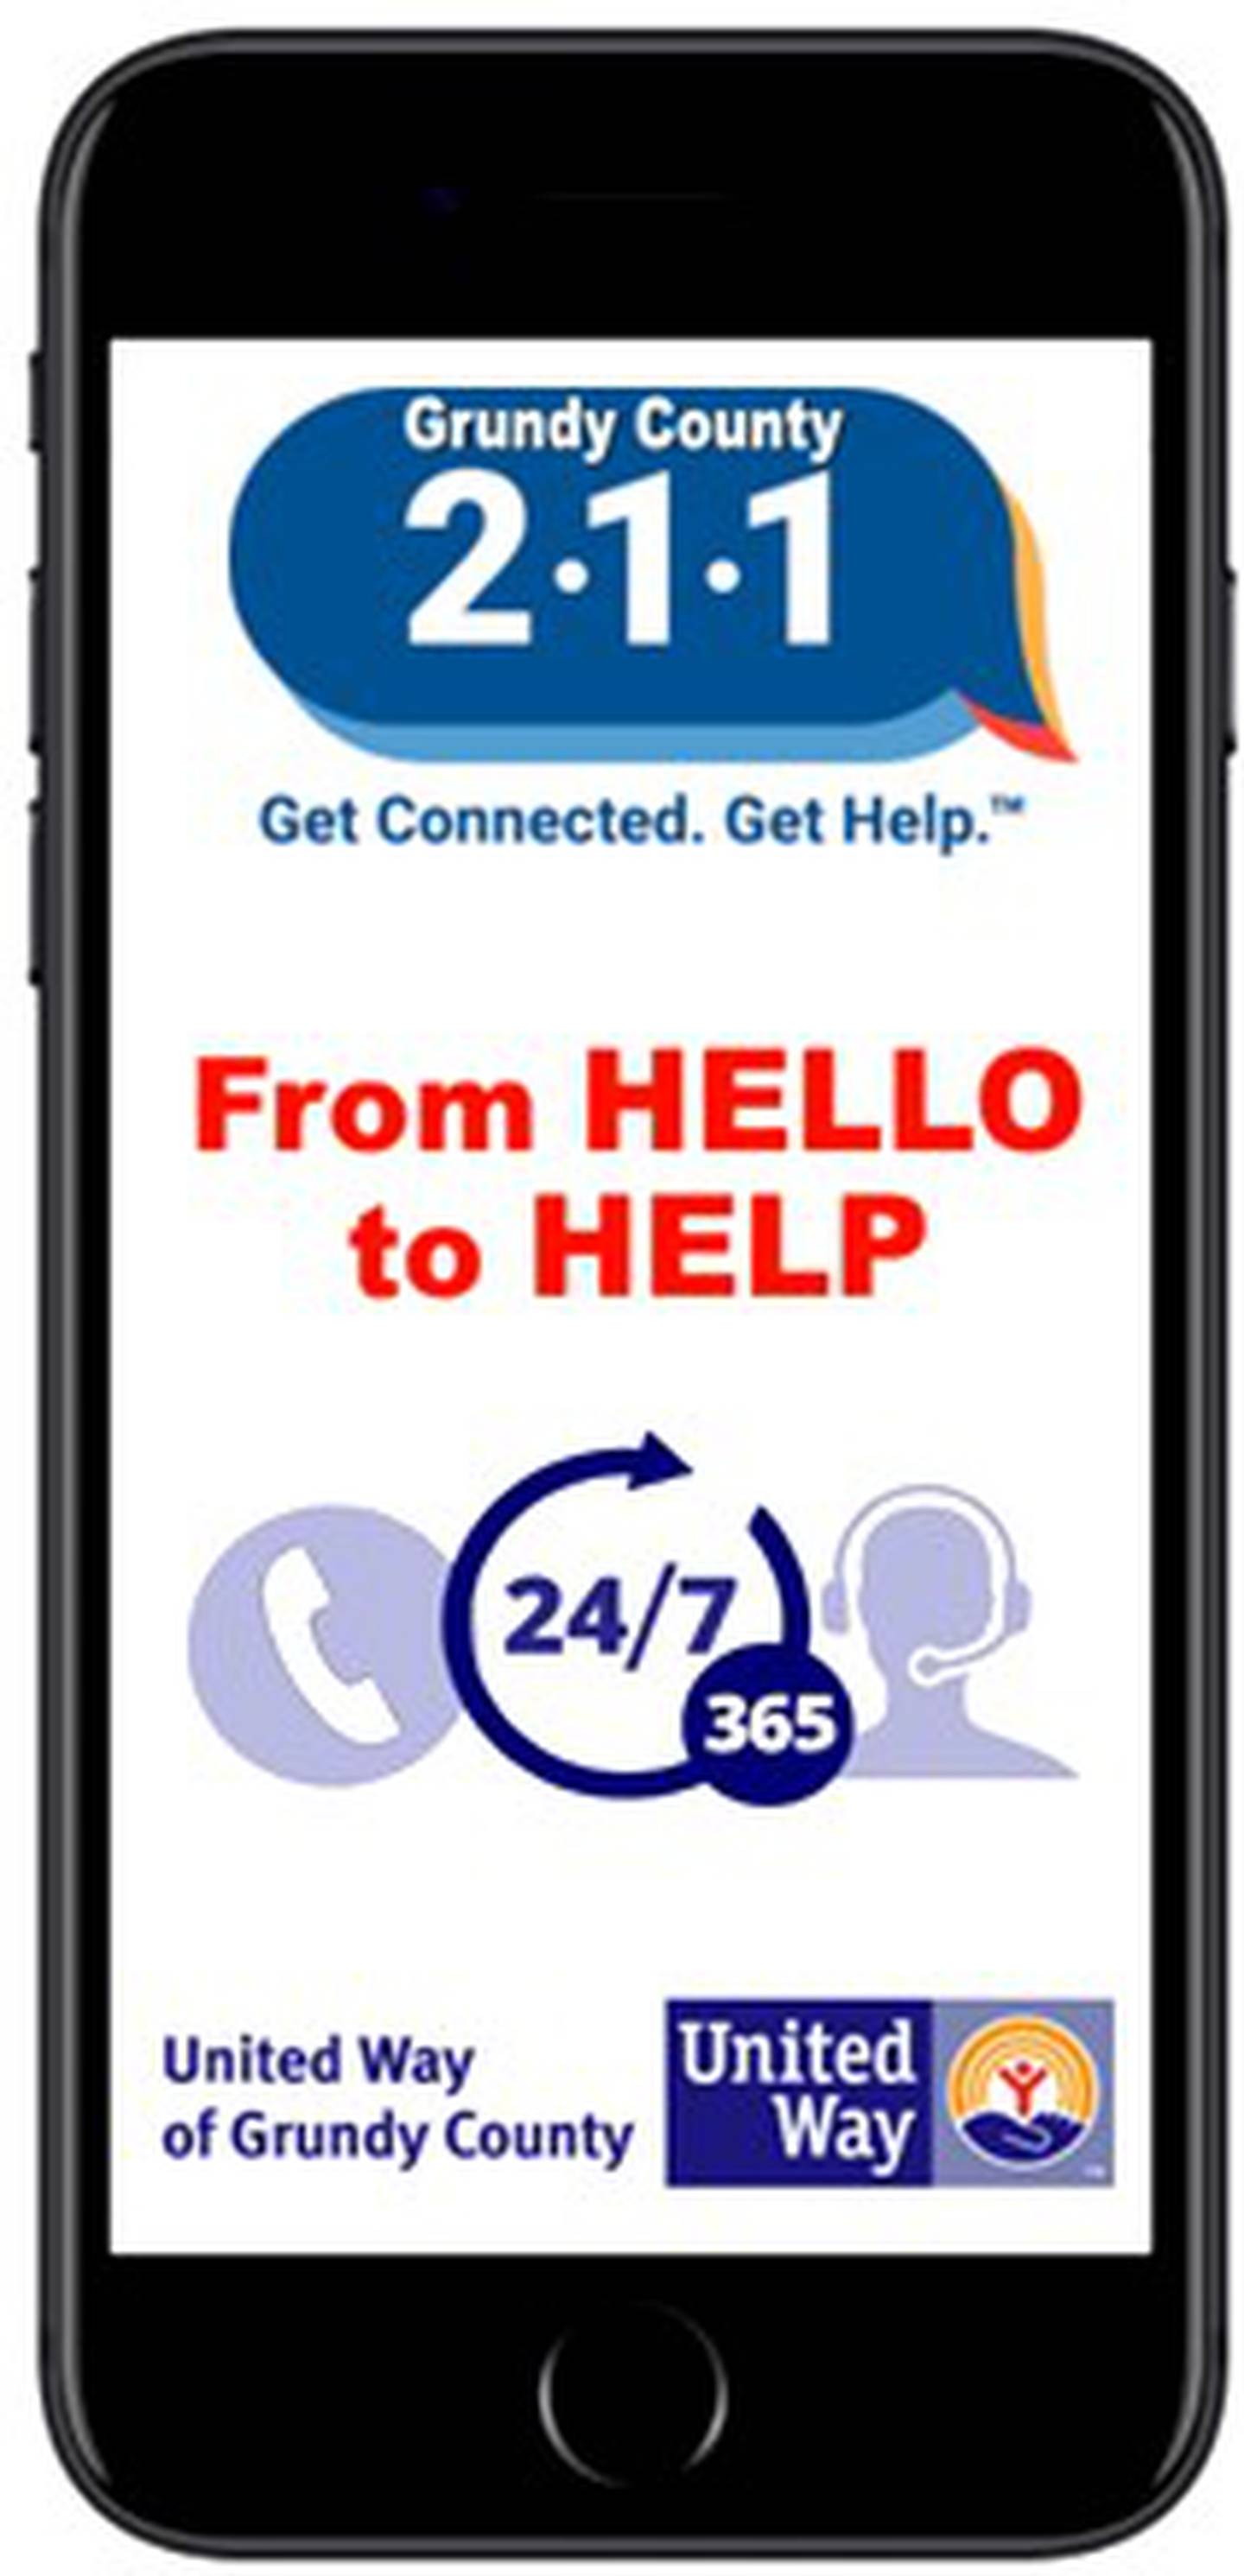 Grundy County 2-1-1 is a free, confidential, 24-hour information and referral service that connects individuals with health and human services including housing, shelter, food, utilities, healthcare, mental health, employment, education, child care, disability services, seniors, veterans, government, legal, transportation, disaster, crisis intervention and so much more.